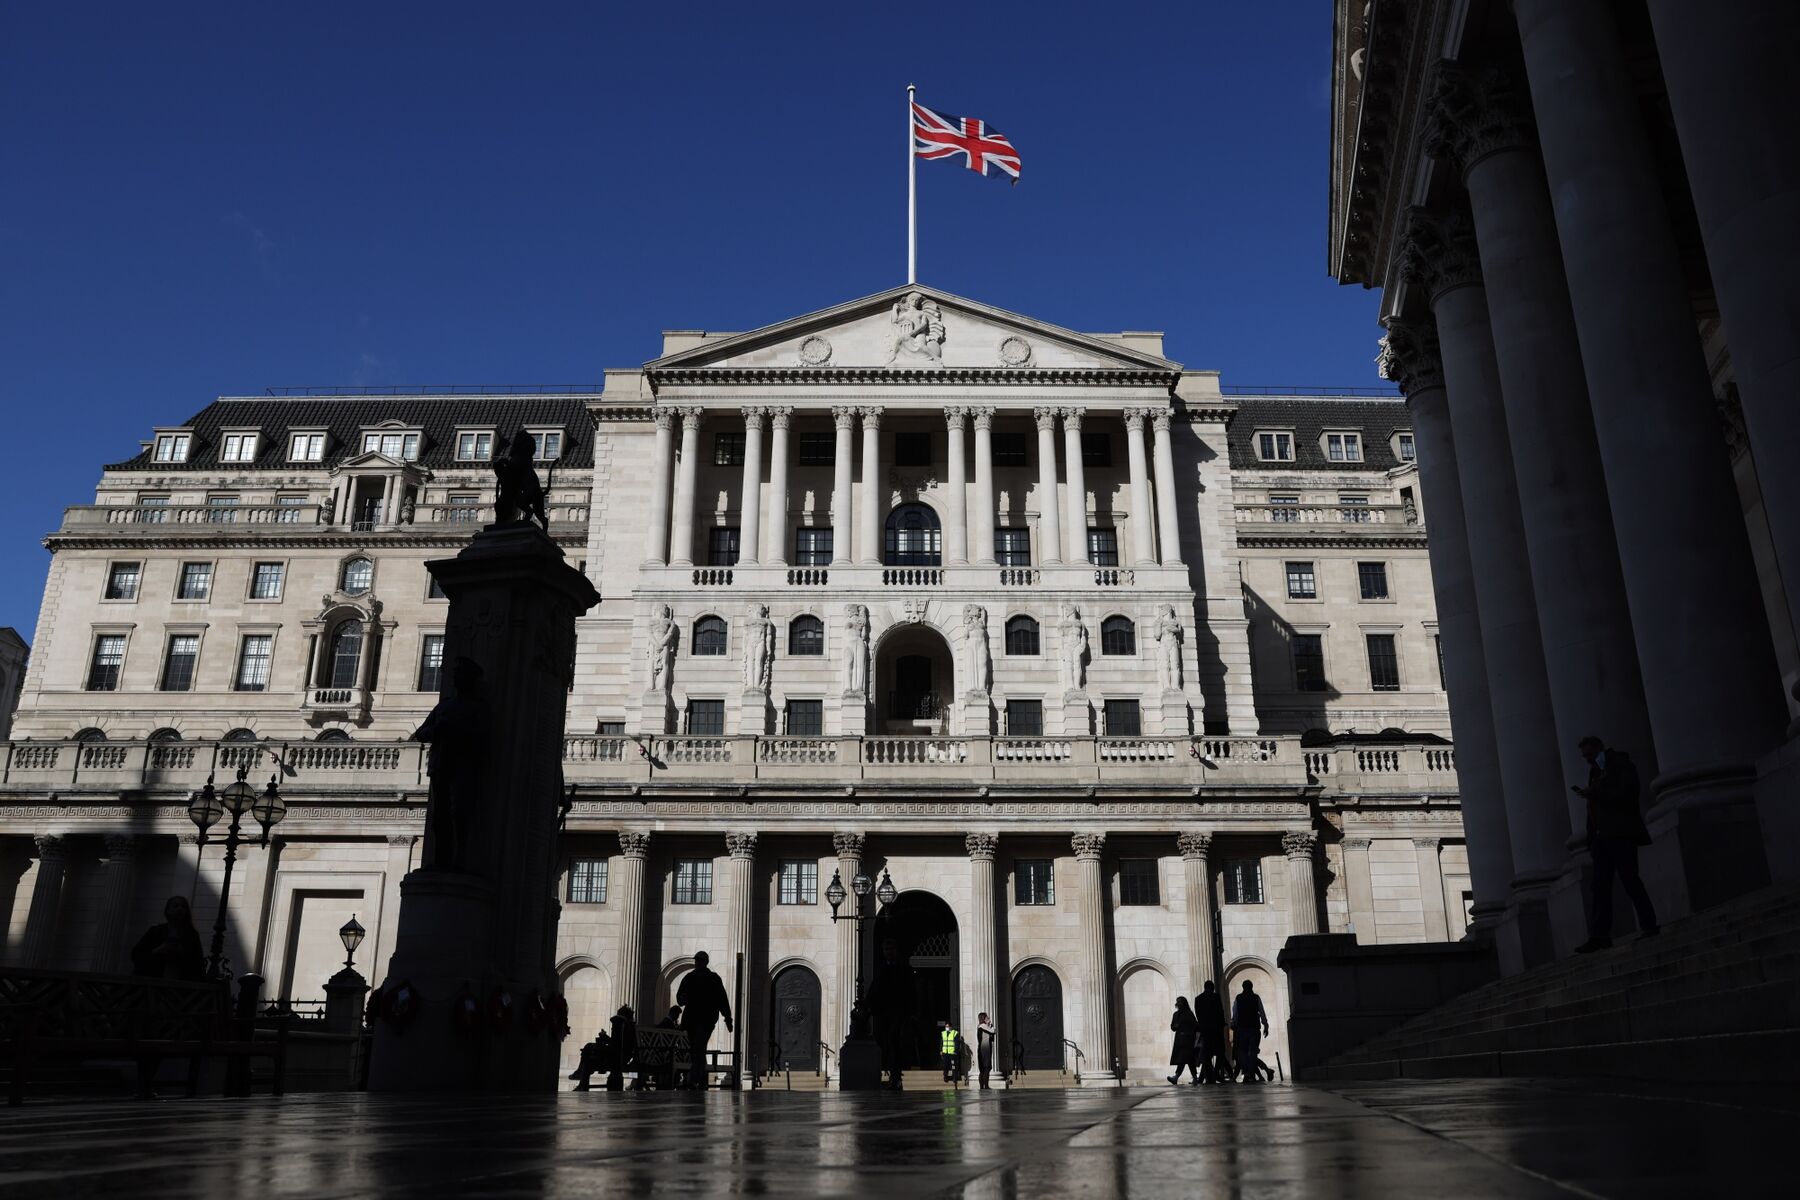 A British Union flag above the Bank of England in the City of London, U.K.